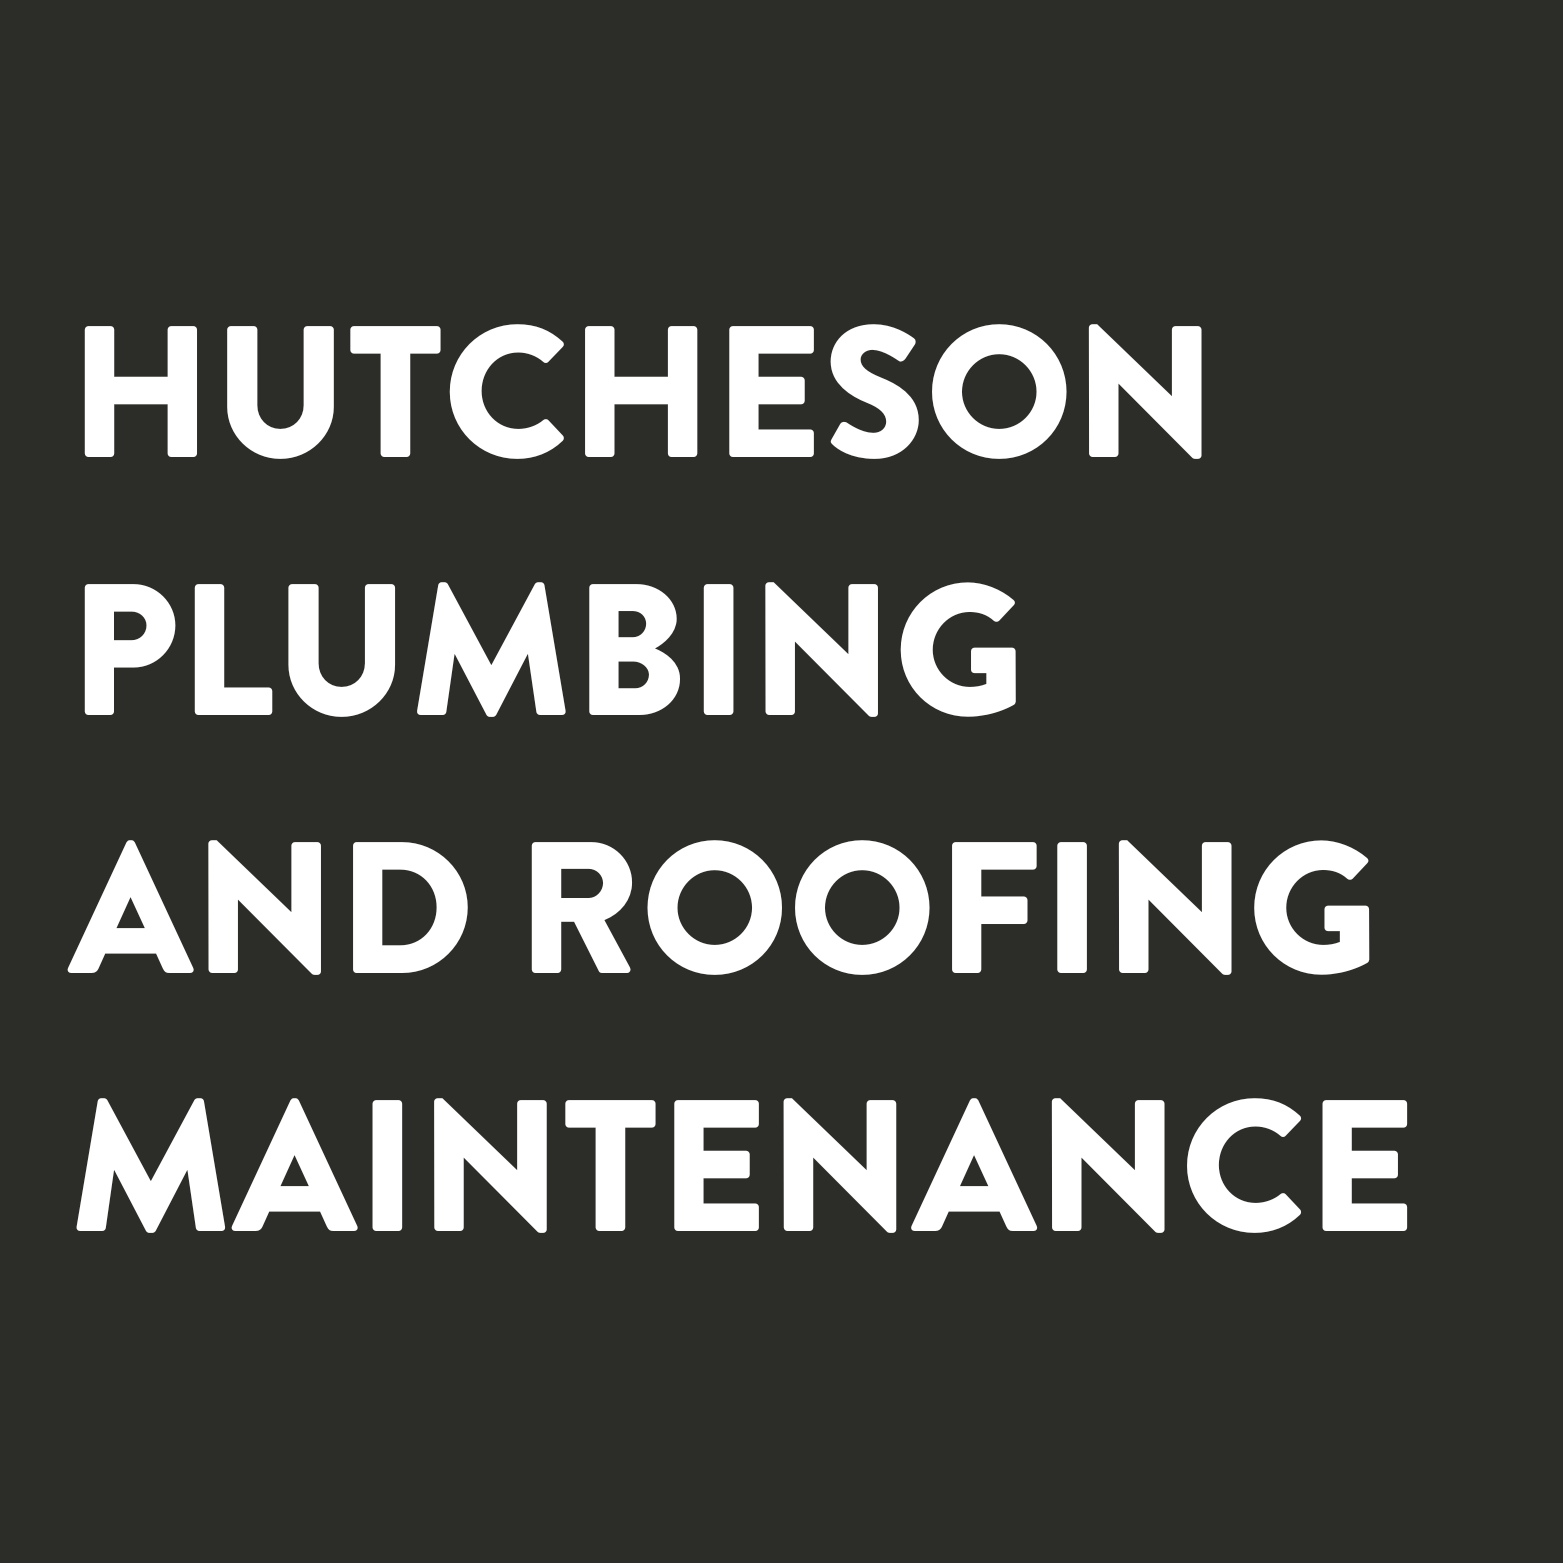 Hutcheson Plumbing & Roofing Maintenance: Roofer on the Sunshine Coast